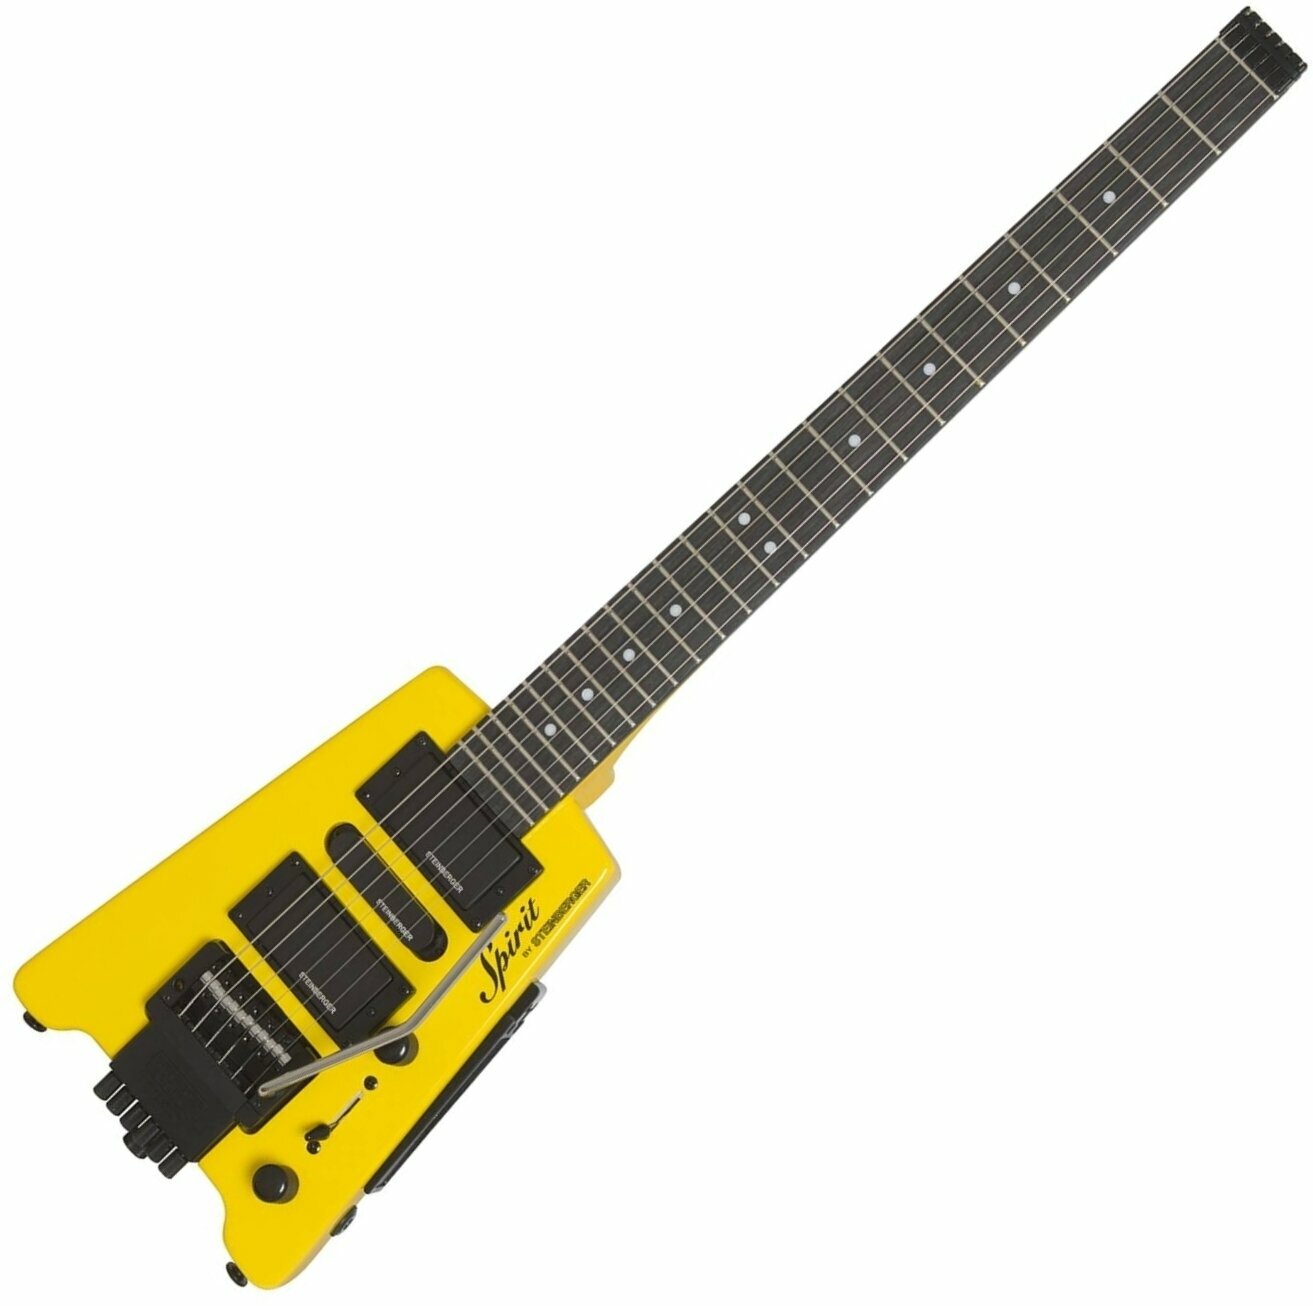 Headless Gitarre Steinberger Spirit Gt-Pro Deluxe Outfit Hb-Sc-Hb Hot Rod Yellow